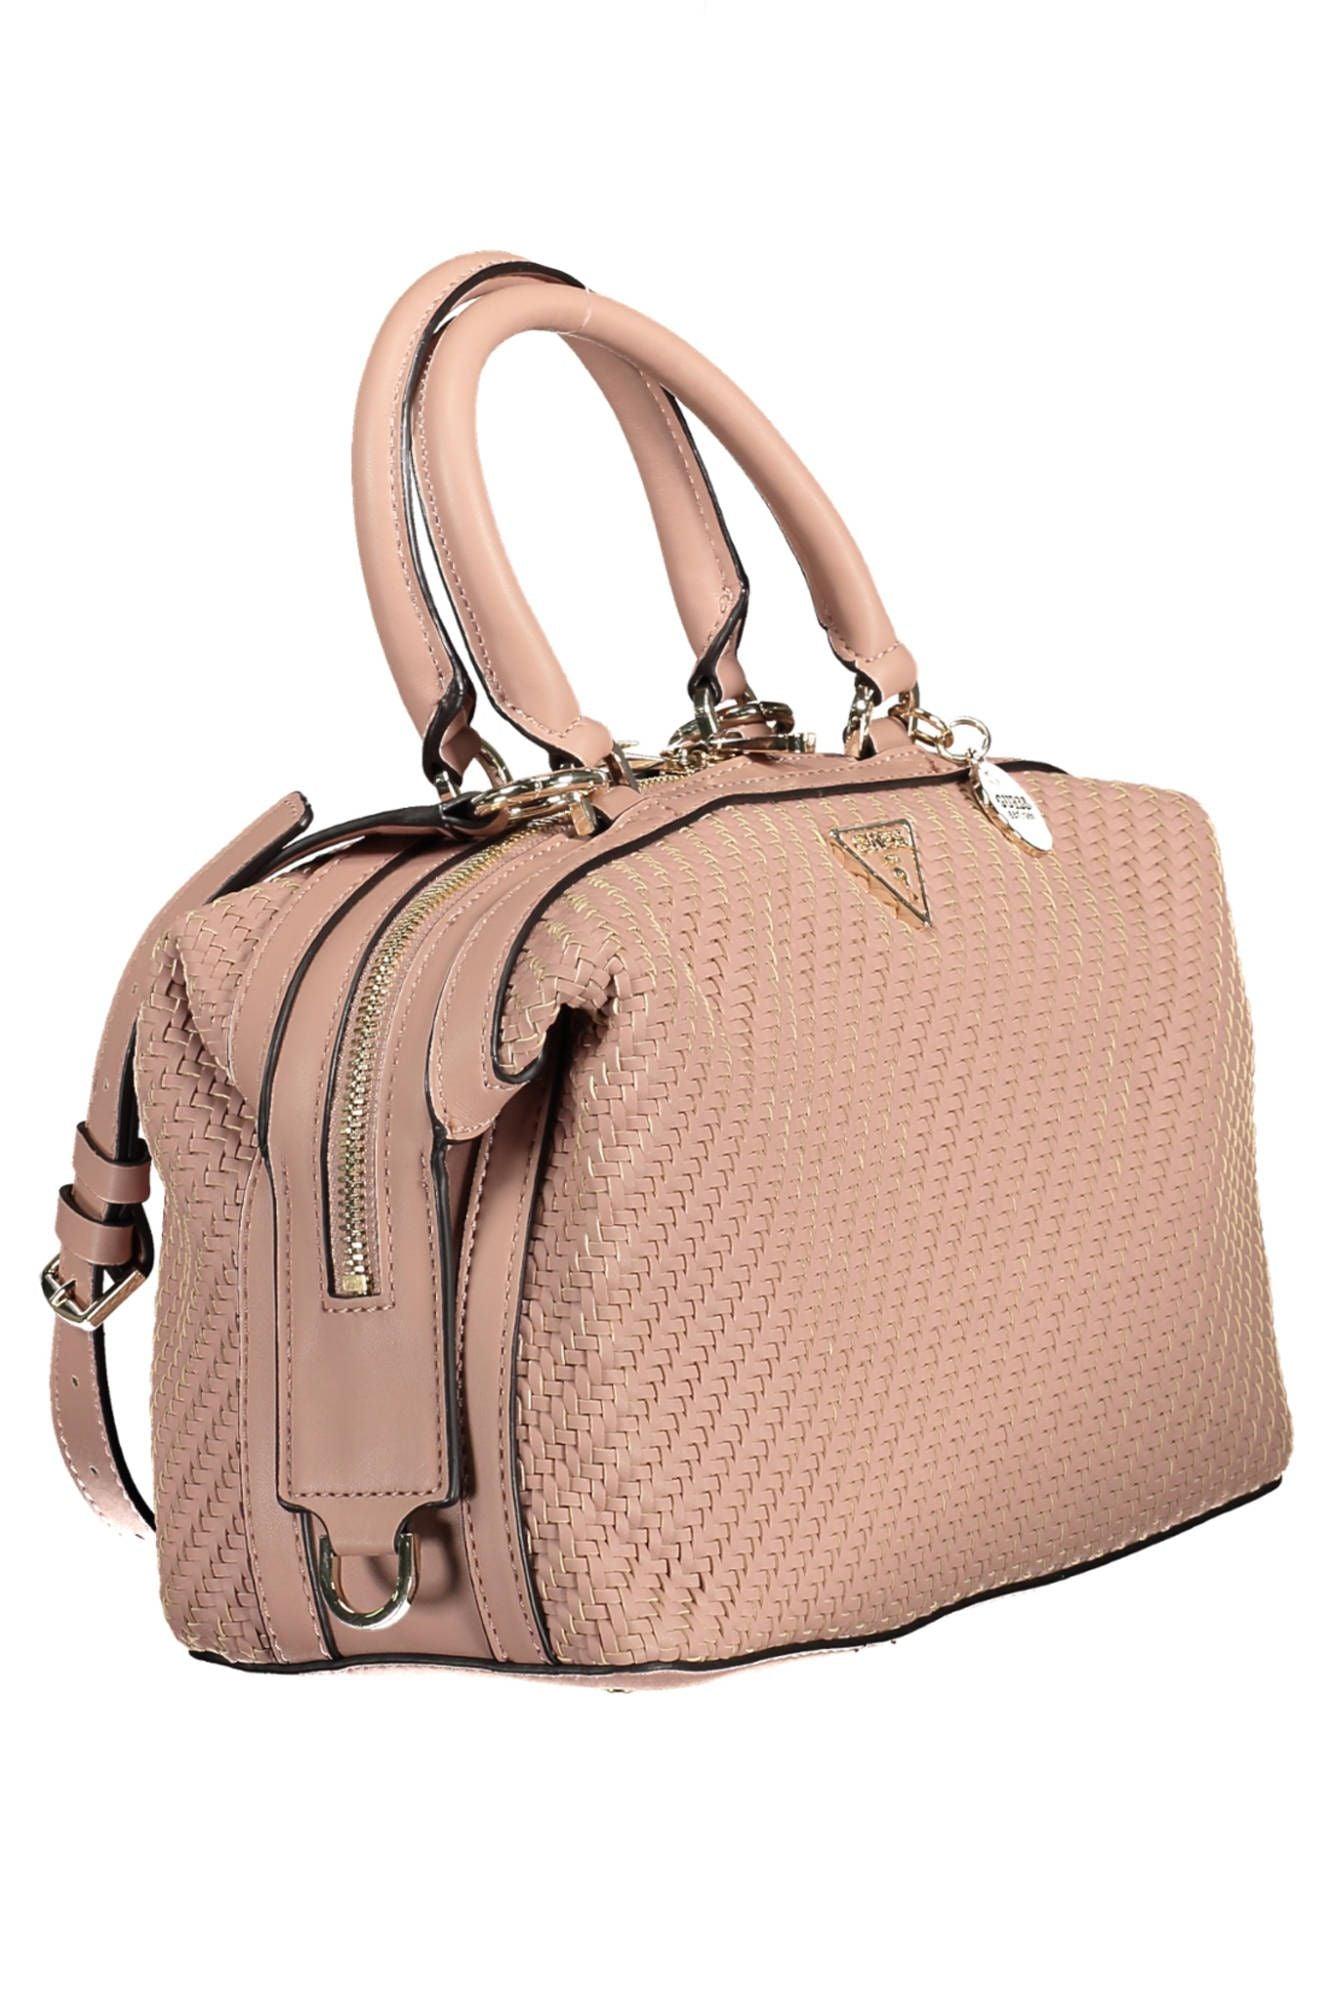 Guess Jeans Chic Pink Satchel with Contrasting Details - PER.FASHION